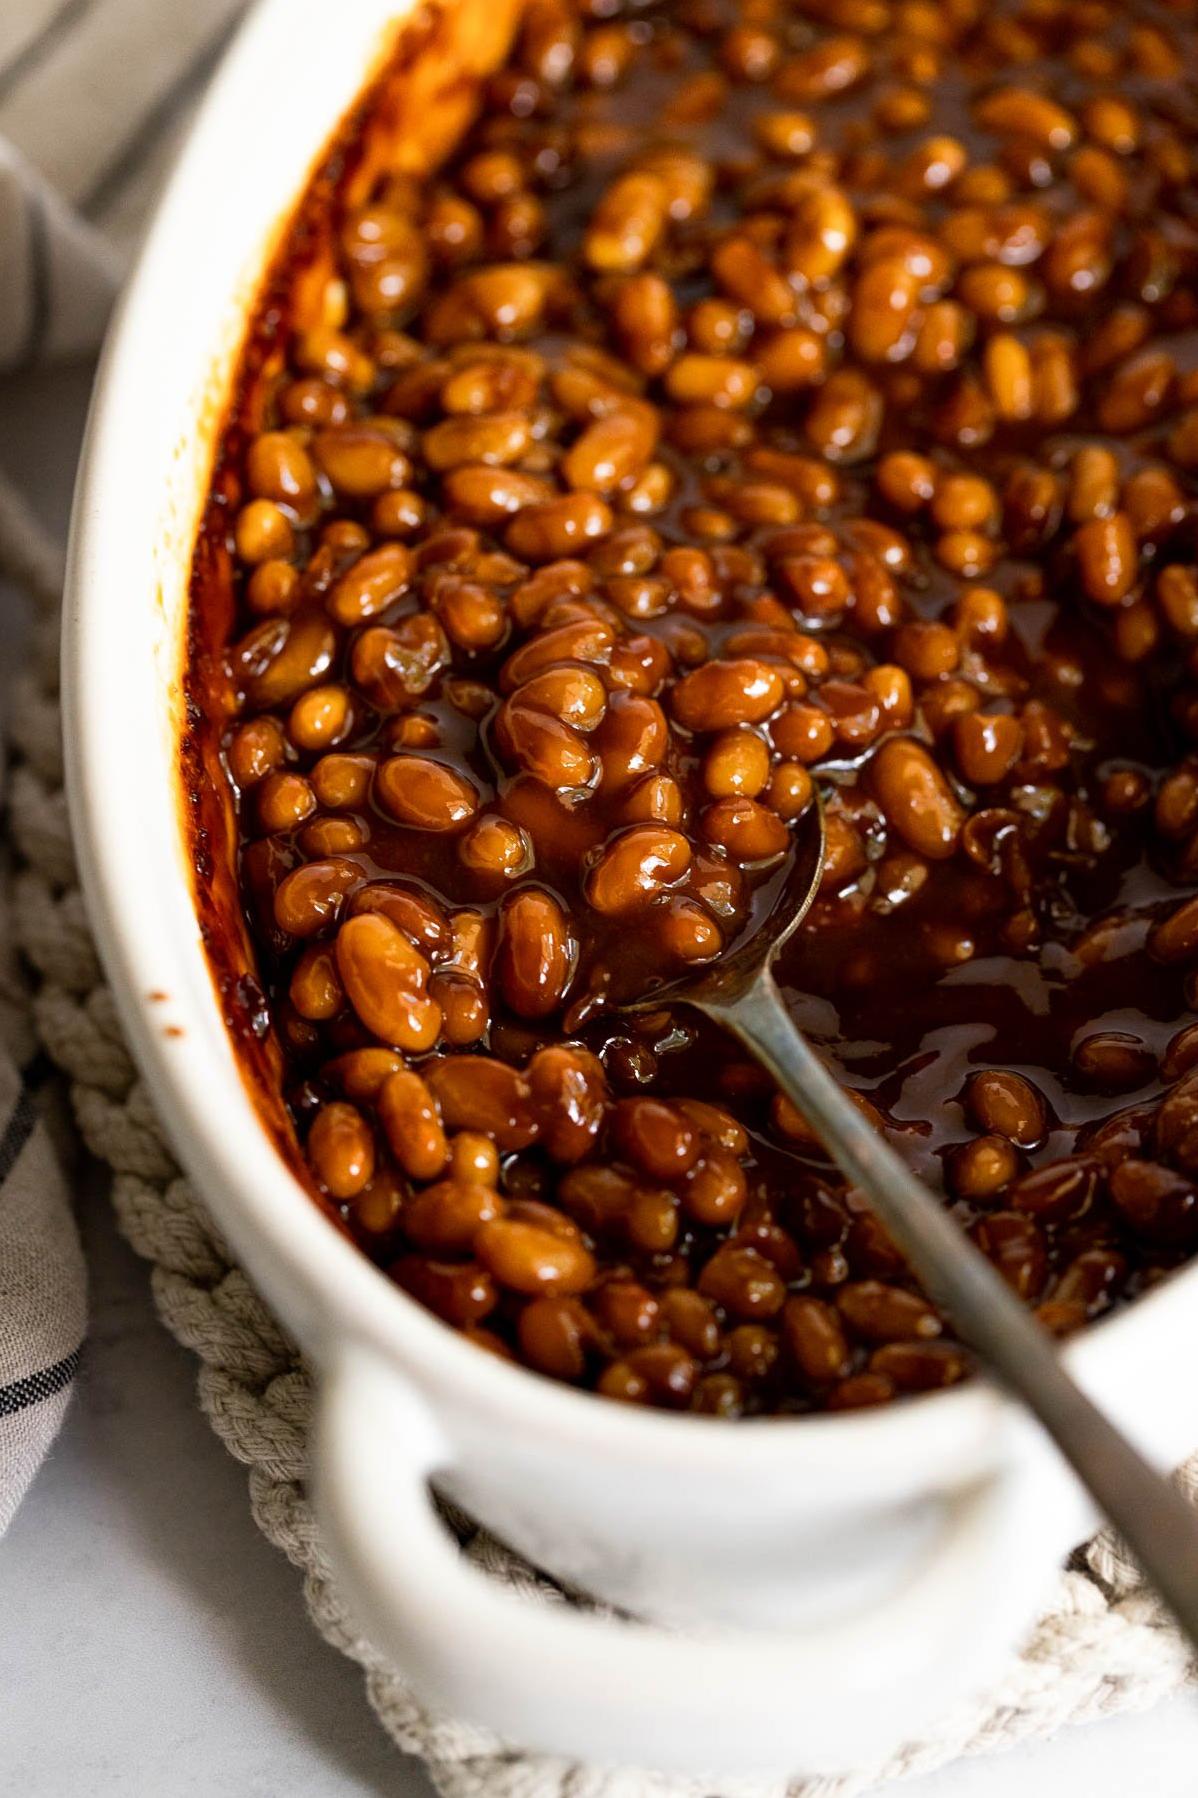  Who needs meat when you have these tasty beans?